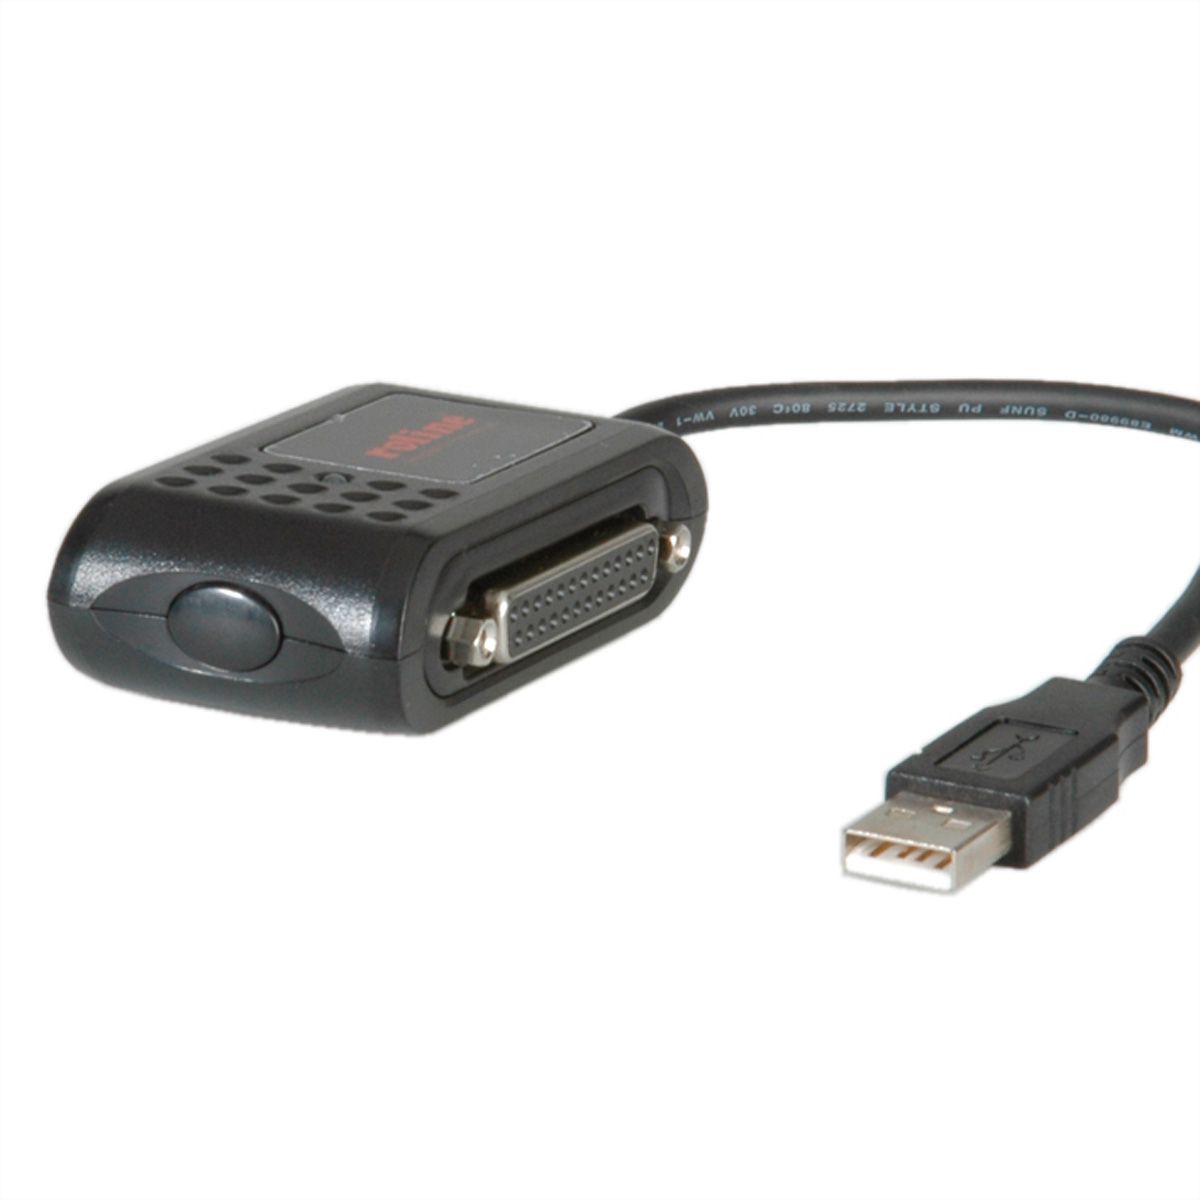 usb 2.0 serial driver for windows xp